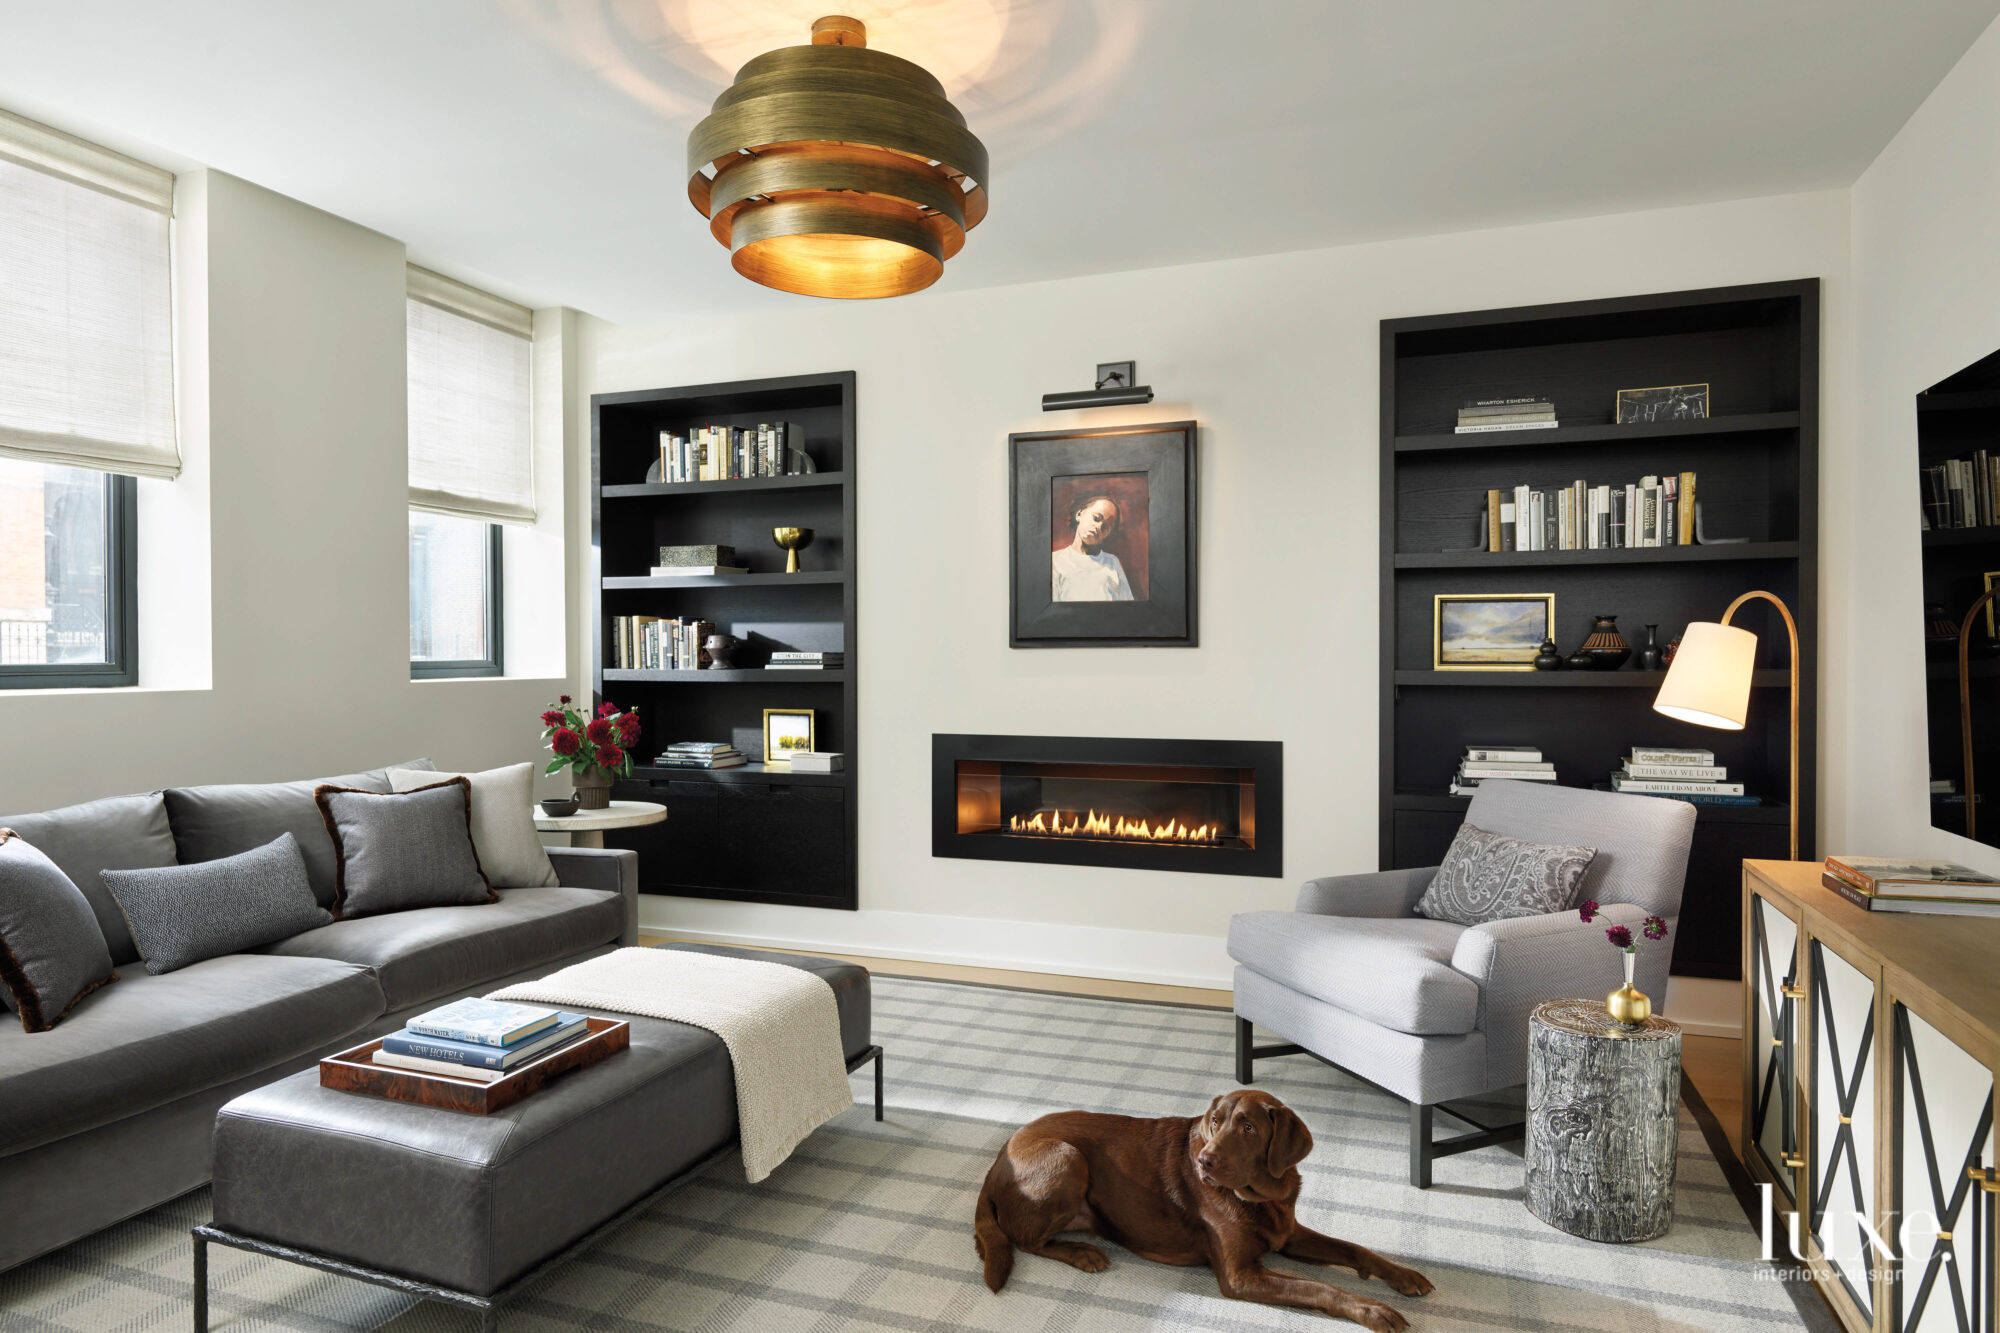 The den is decorated in shades of gray and cream with a watercolor portrait hanging above a modern inset fireplace.